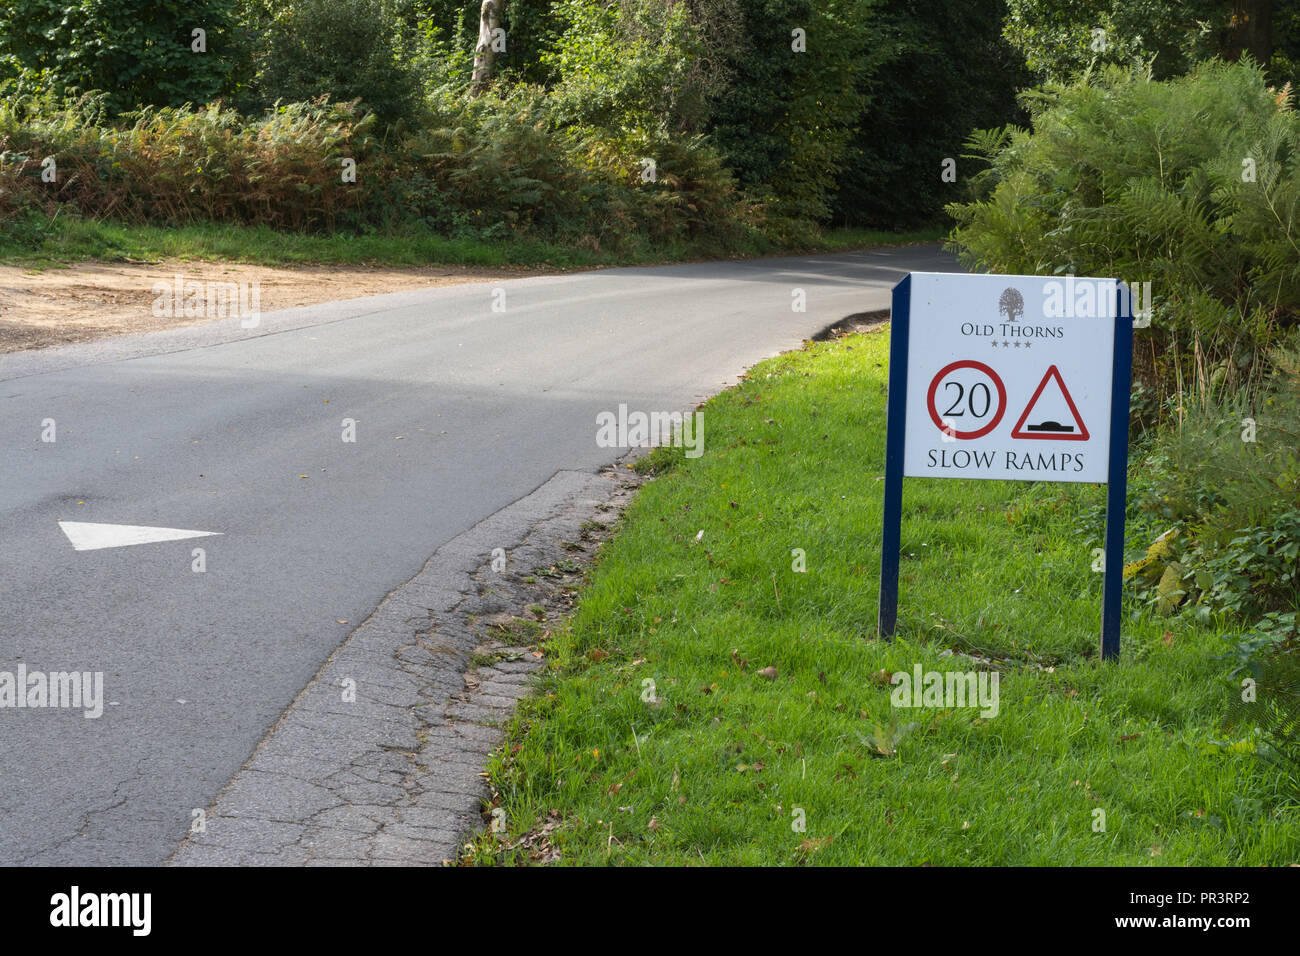 Speed bump and warning sign on drive leading to Old Thorns golf club and spa resort with 20 mph speed limit, Liphook, Hampshire, UK Stock Photo